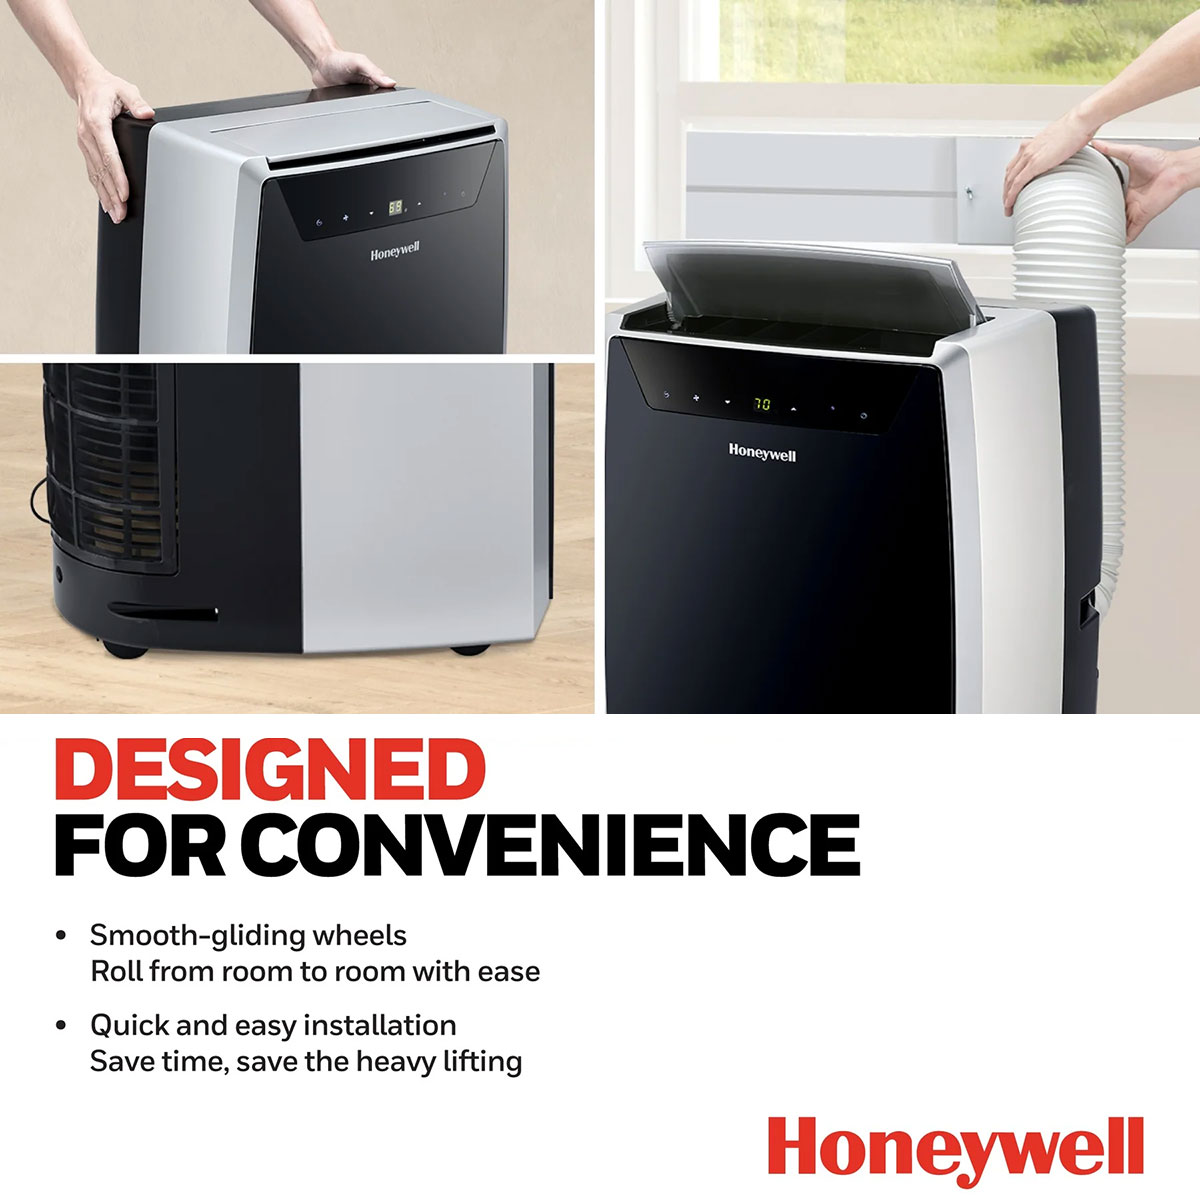 https://www.honeywellstore.com/store/images/products/large_images/mn4cfs0-portable-air-conditioner-14000-btu-2.jpg